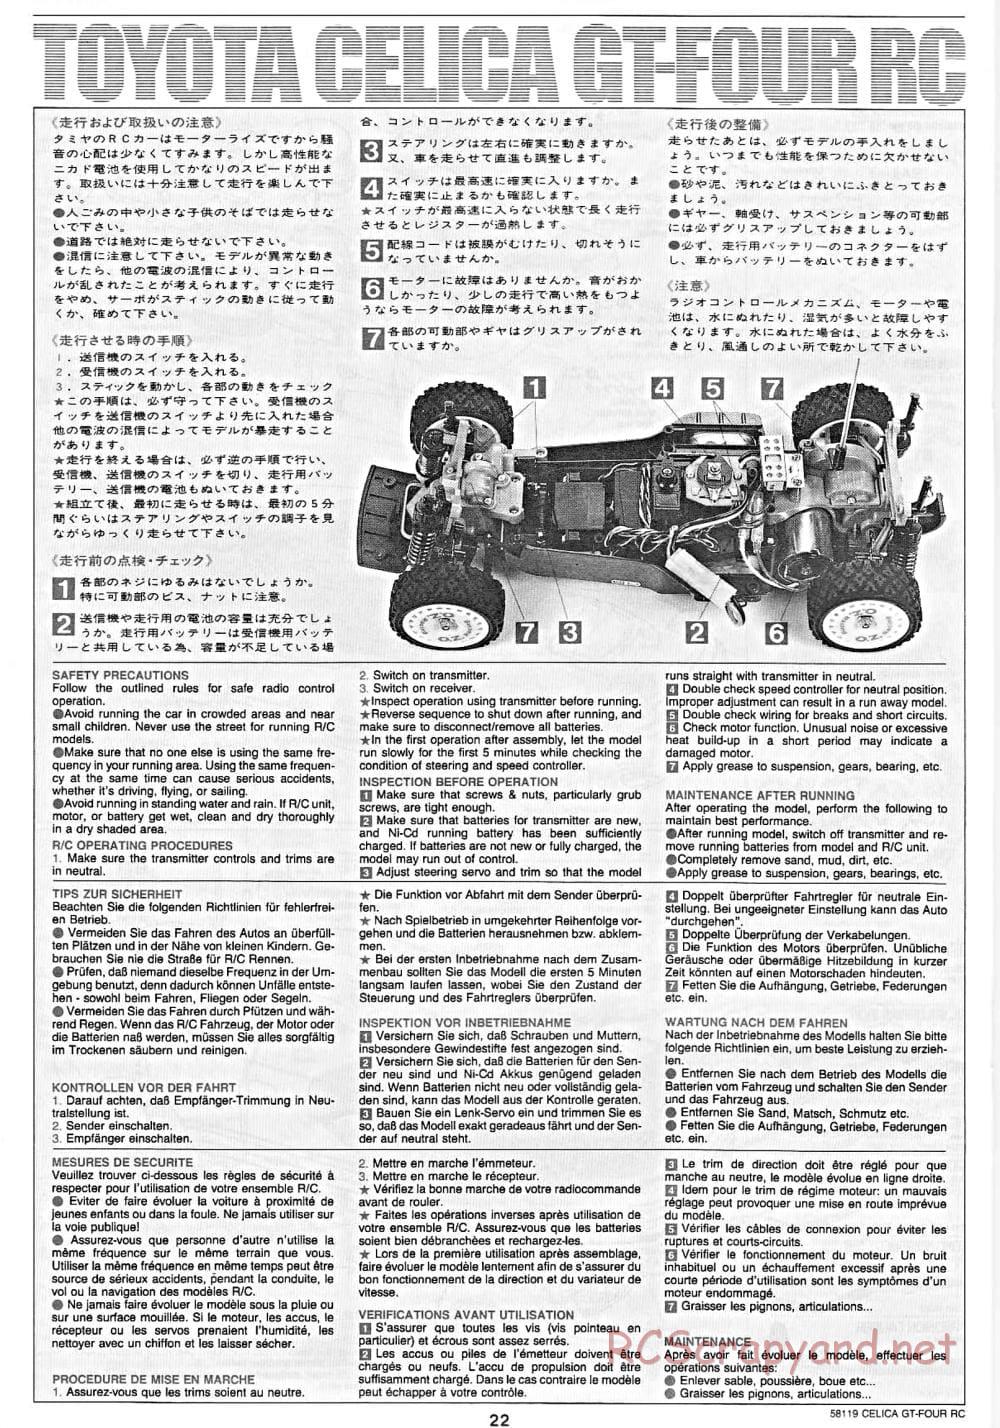 Tamiya - Toyota Celica GT-Four RC - TA-01 Chassis - Manual - Page 22